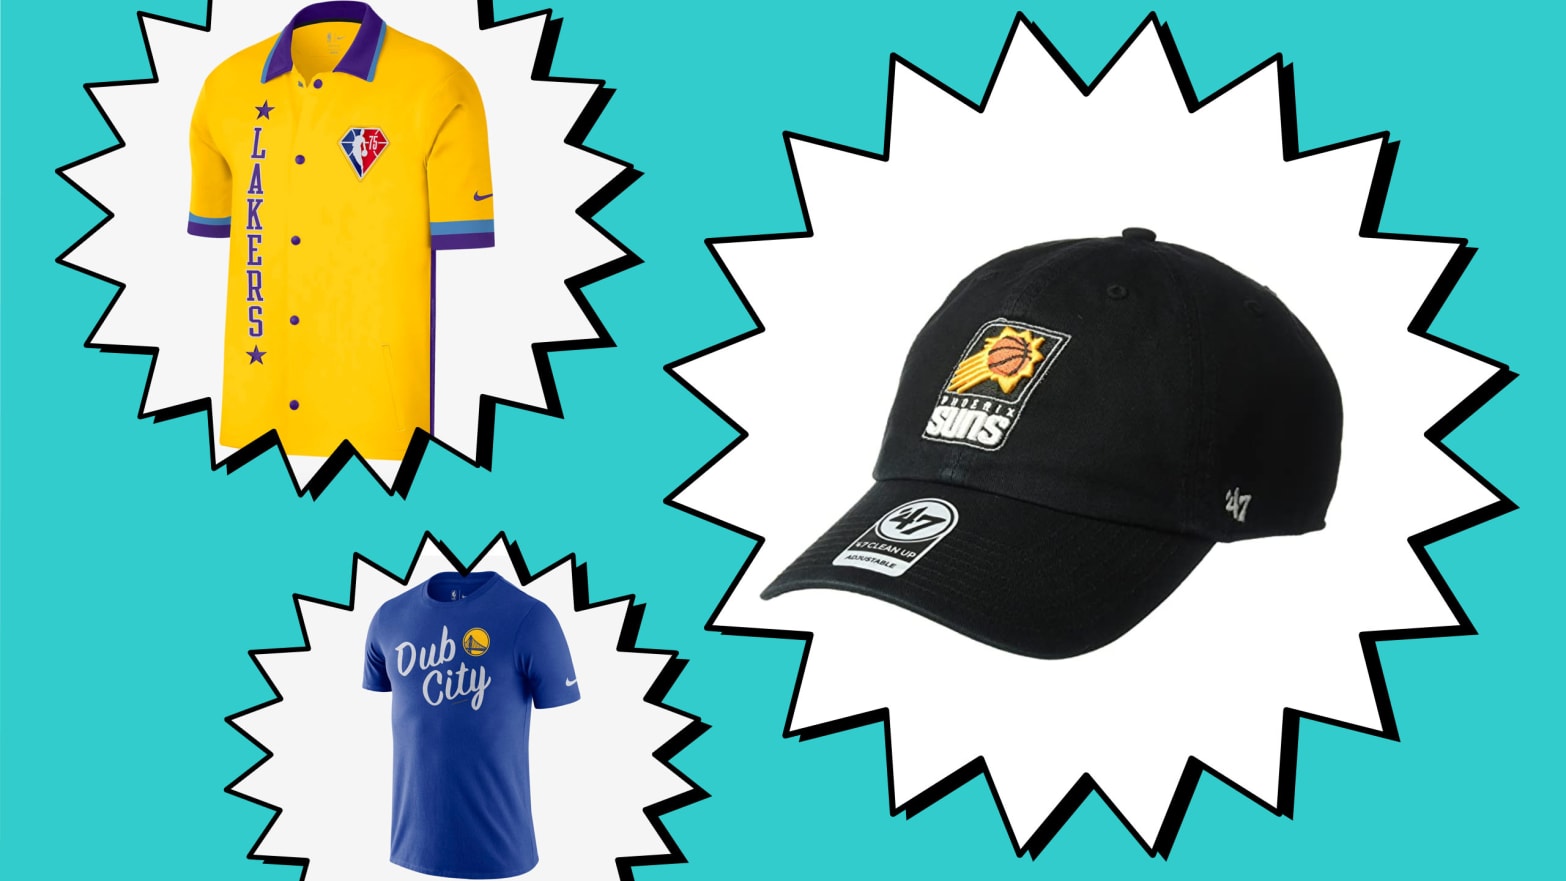 Phoenix Suns NBA Finals shirts, hats: How to shop for Western